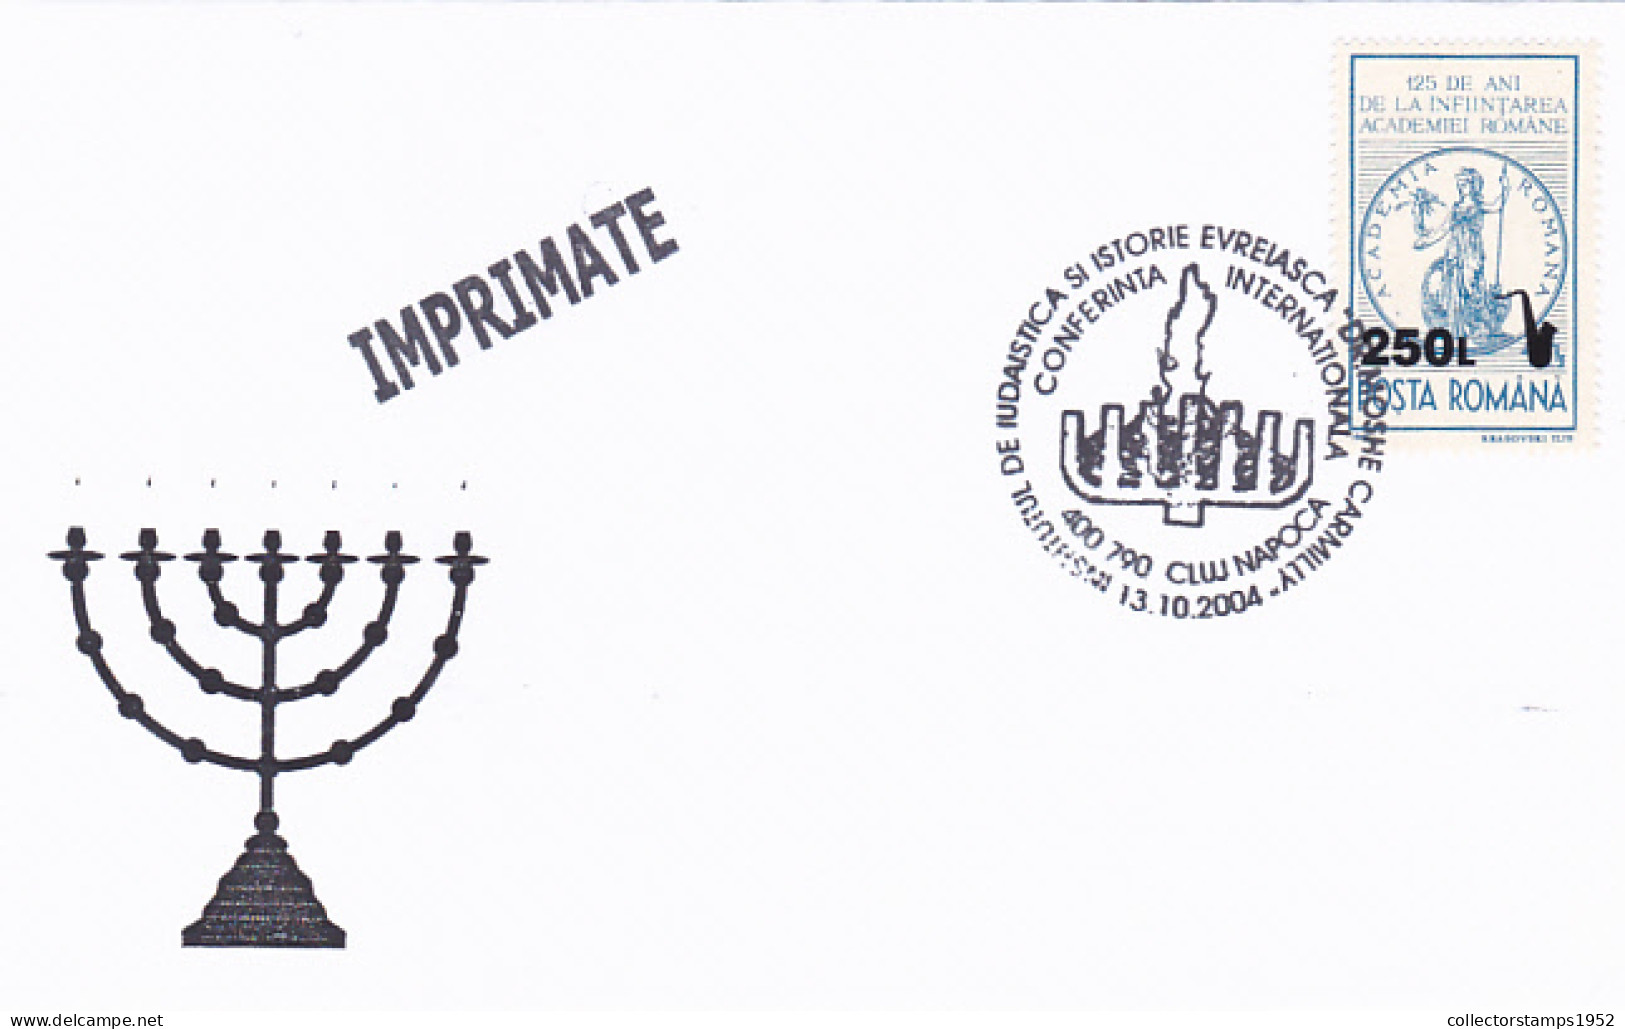 MOSHE CARMILLY JEWISH INSTITUTE, CONFERENCE, JEWISH, RELIGION, SPECIAL COVER, OVERPRINT STAMP, 2004, ROMANIA - Judaísmo